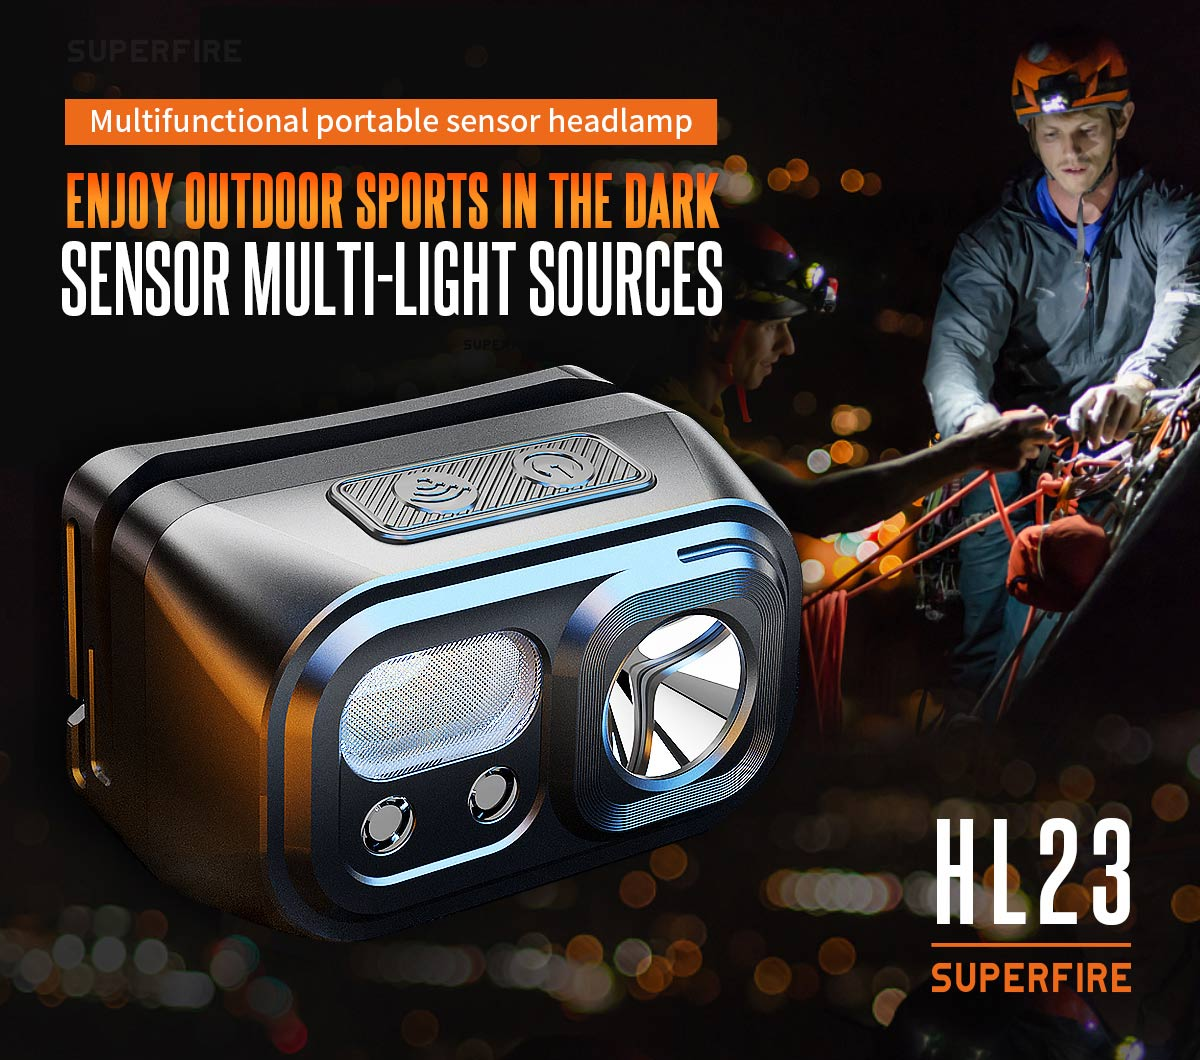 The Superfire Rechargeable Headlamp - A Gadget That Will Give You The Ability To Stay Out Into The Night